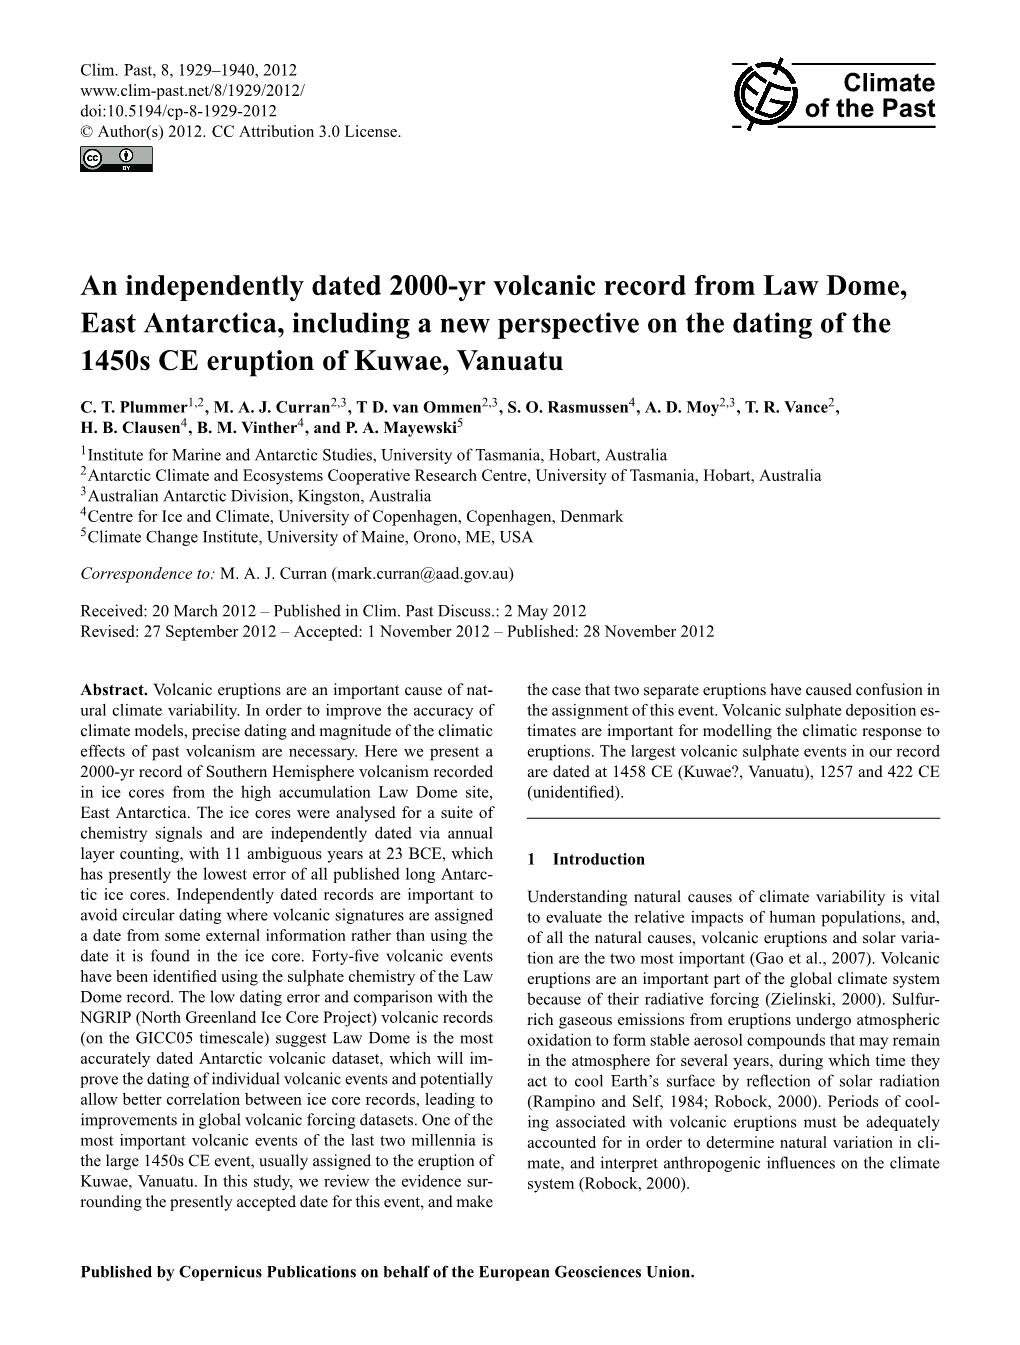 An Independently Dated 2000-Yr Volcanic Record from Law Dome, East Antarctica, Including a New Perspective on the Dating of the 1450S CE Eruption of Kuwae, Vanuatu